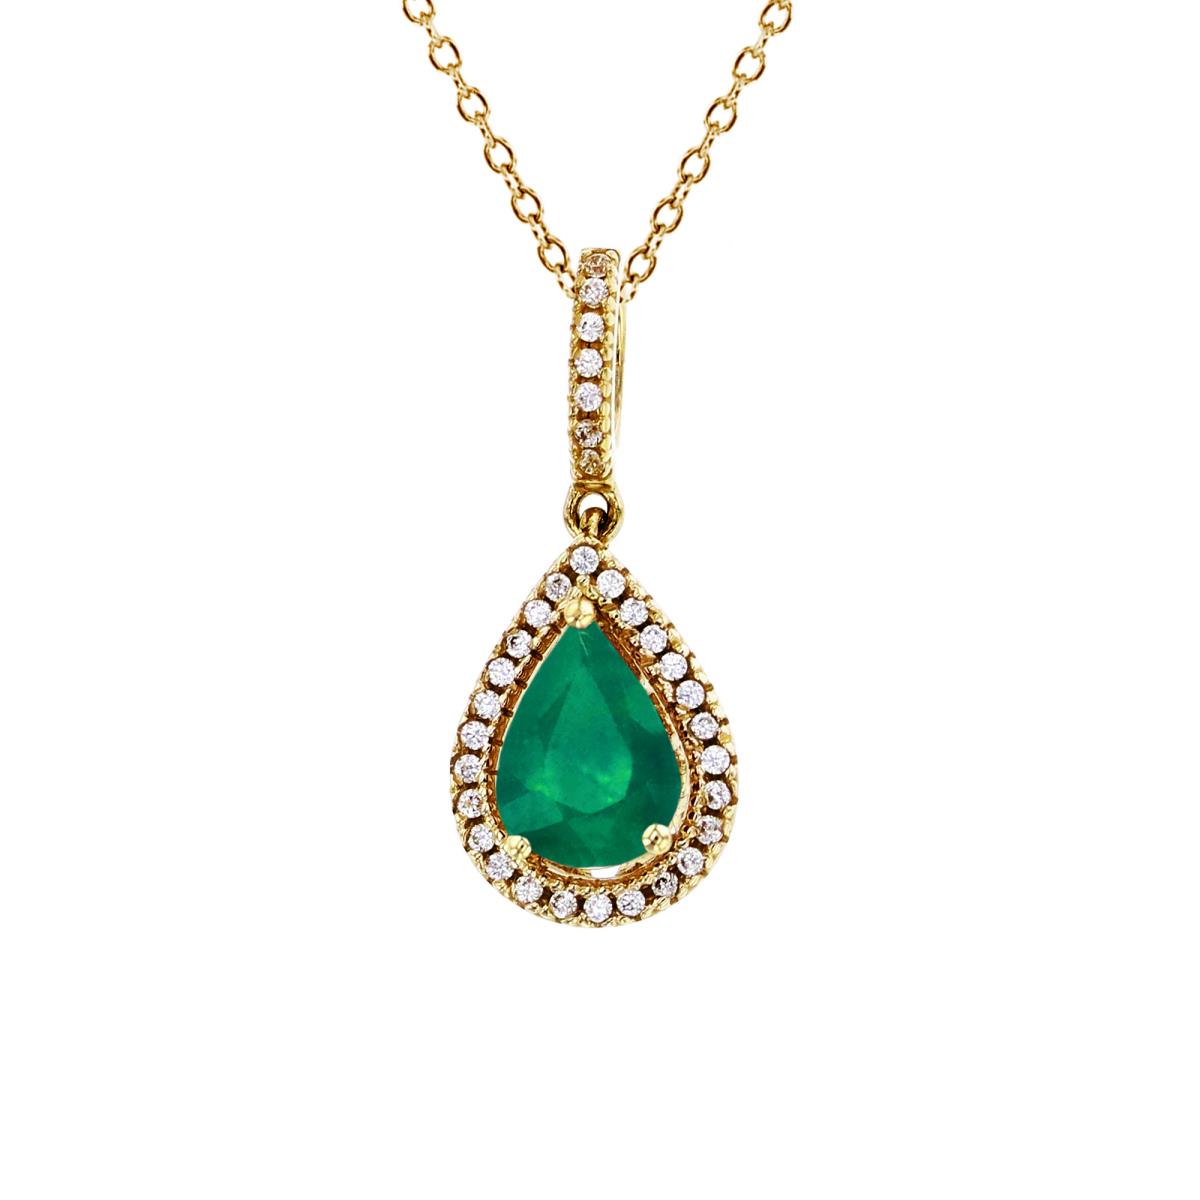 10K Yellow Gold 0.10 CTTW Rnd Diamonds & 7x5mm PS Emerald Halo 18"Necklace